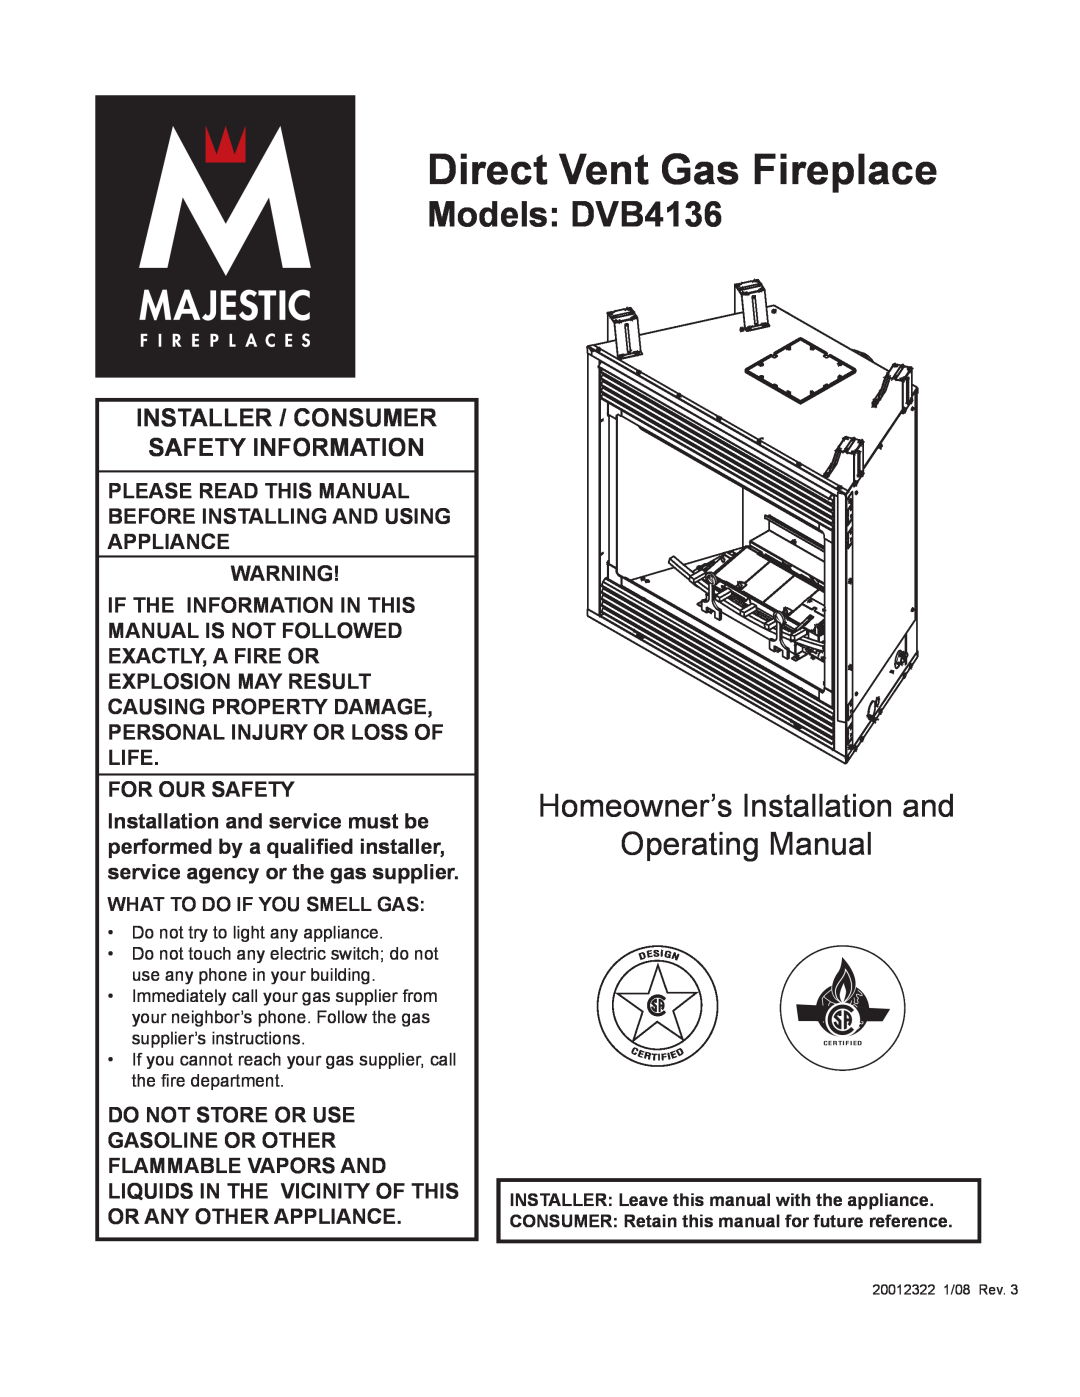 Majestic Appliances manual Direct Vent Gas Fireplace, Models DVB4136, Homeowner’s Installation and Operating Manual 